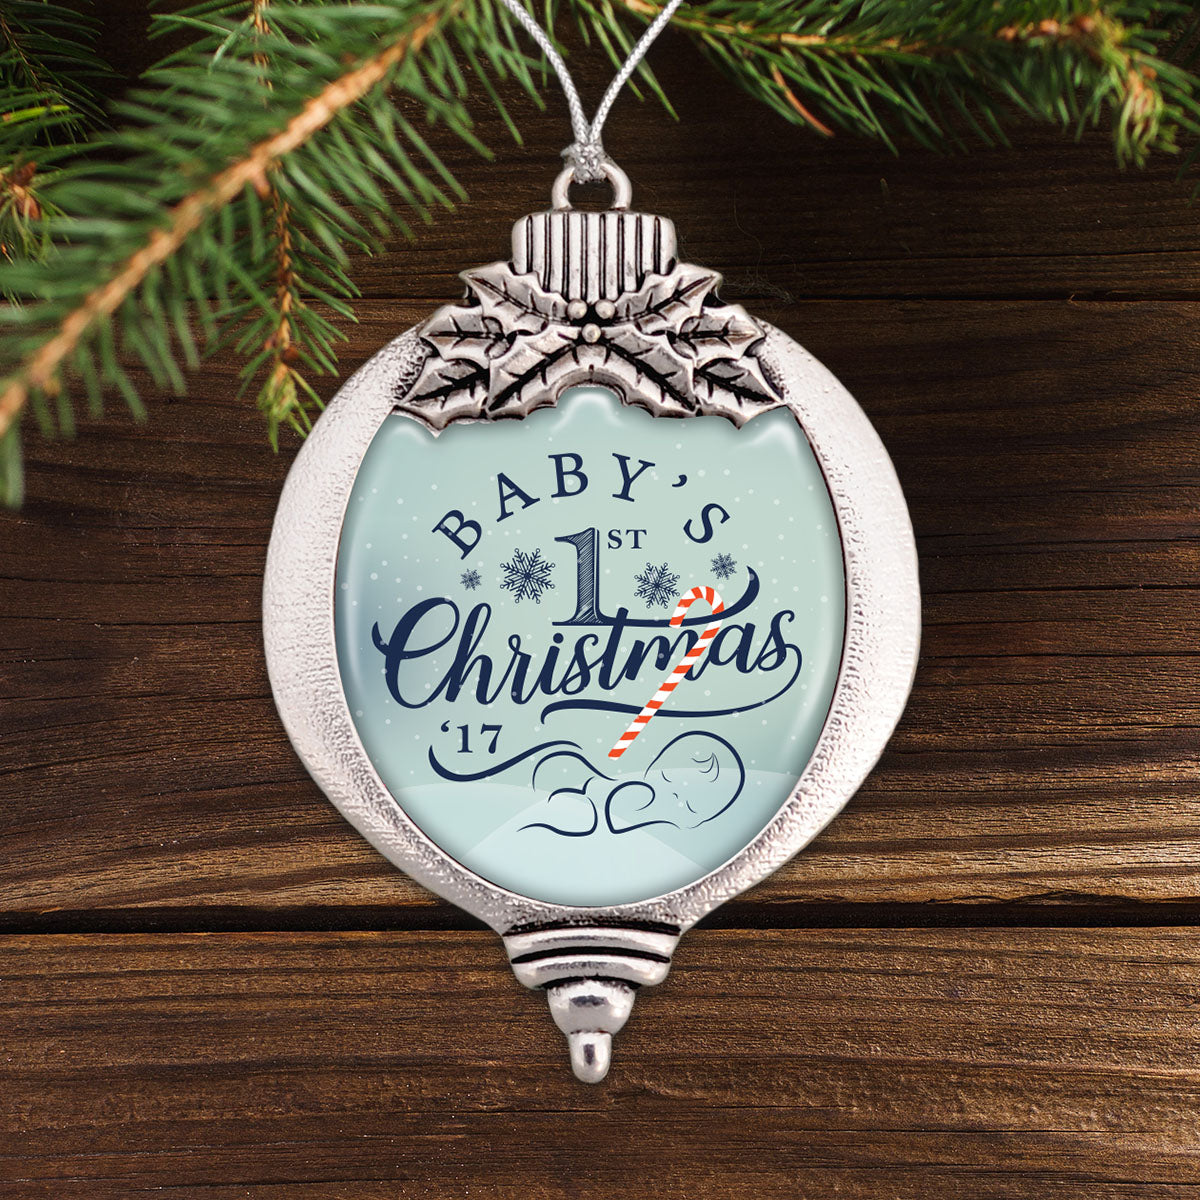 Baby's First Christmas 2017 Bulb Ornament